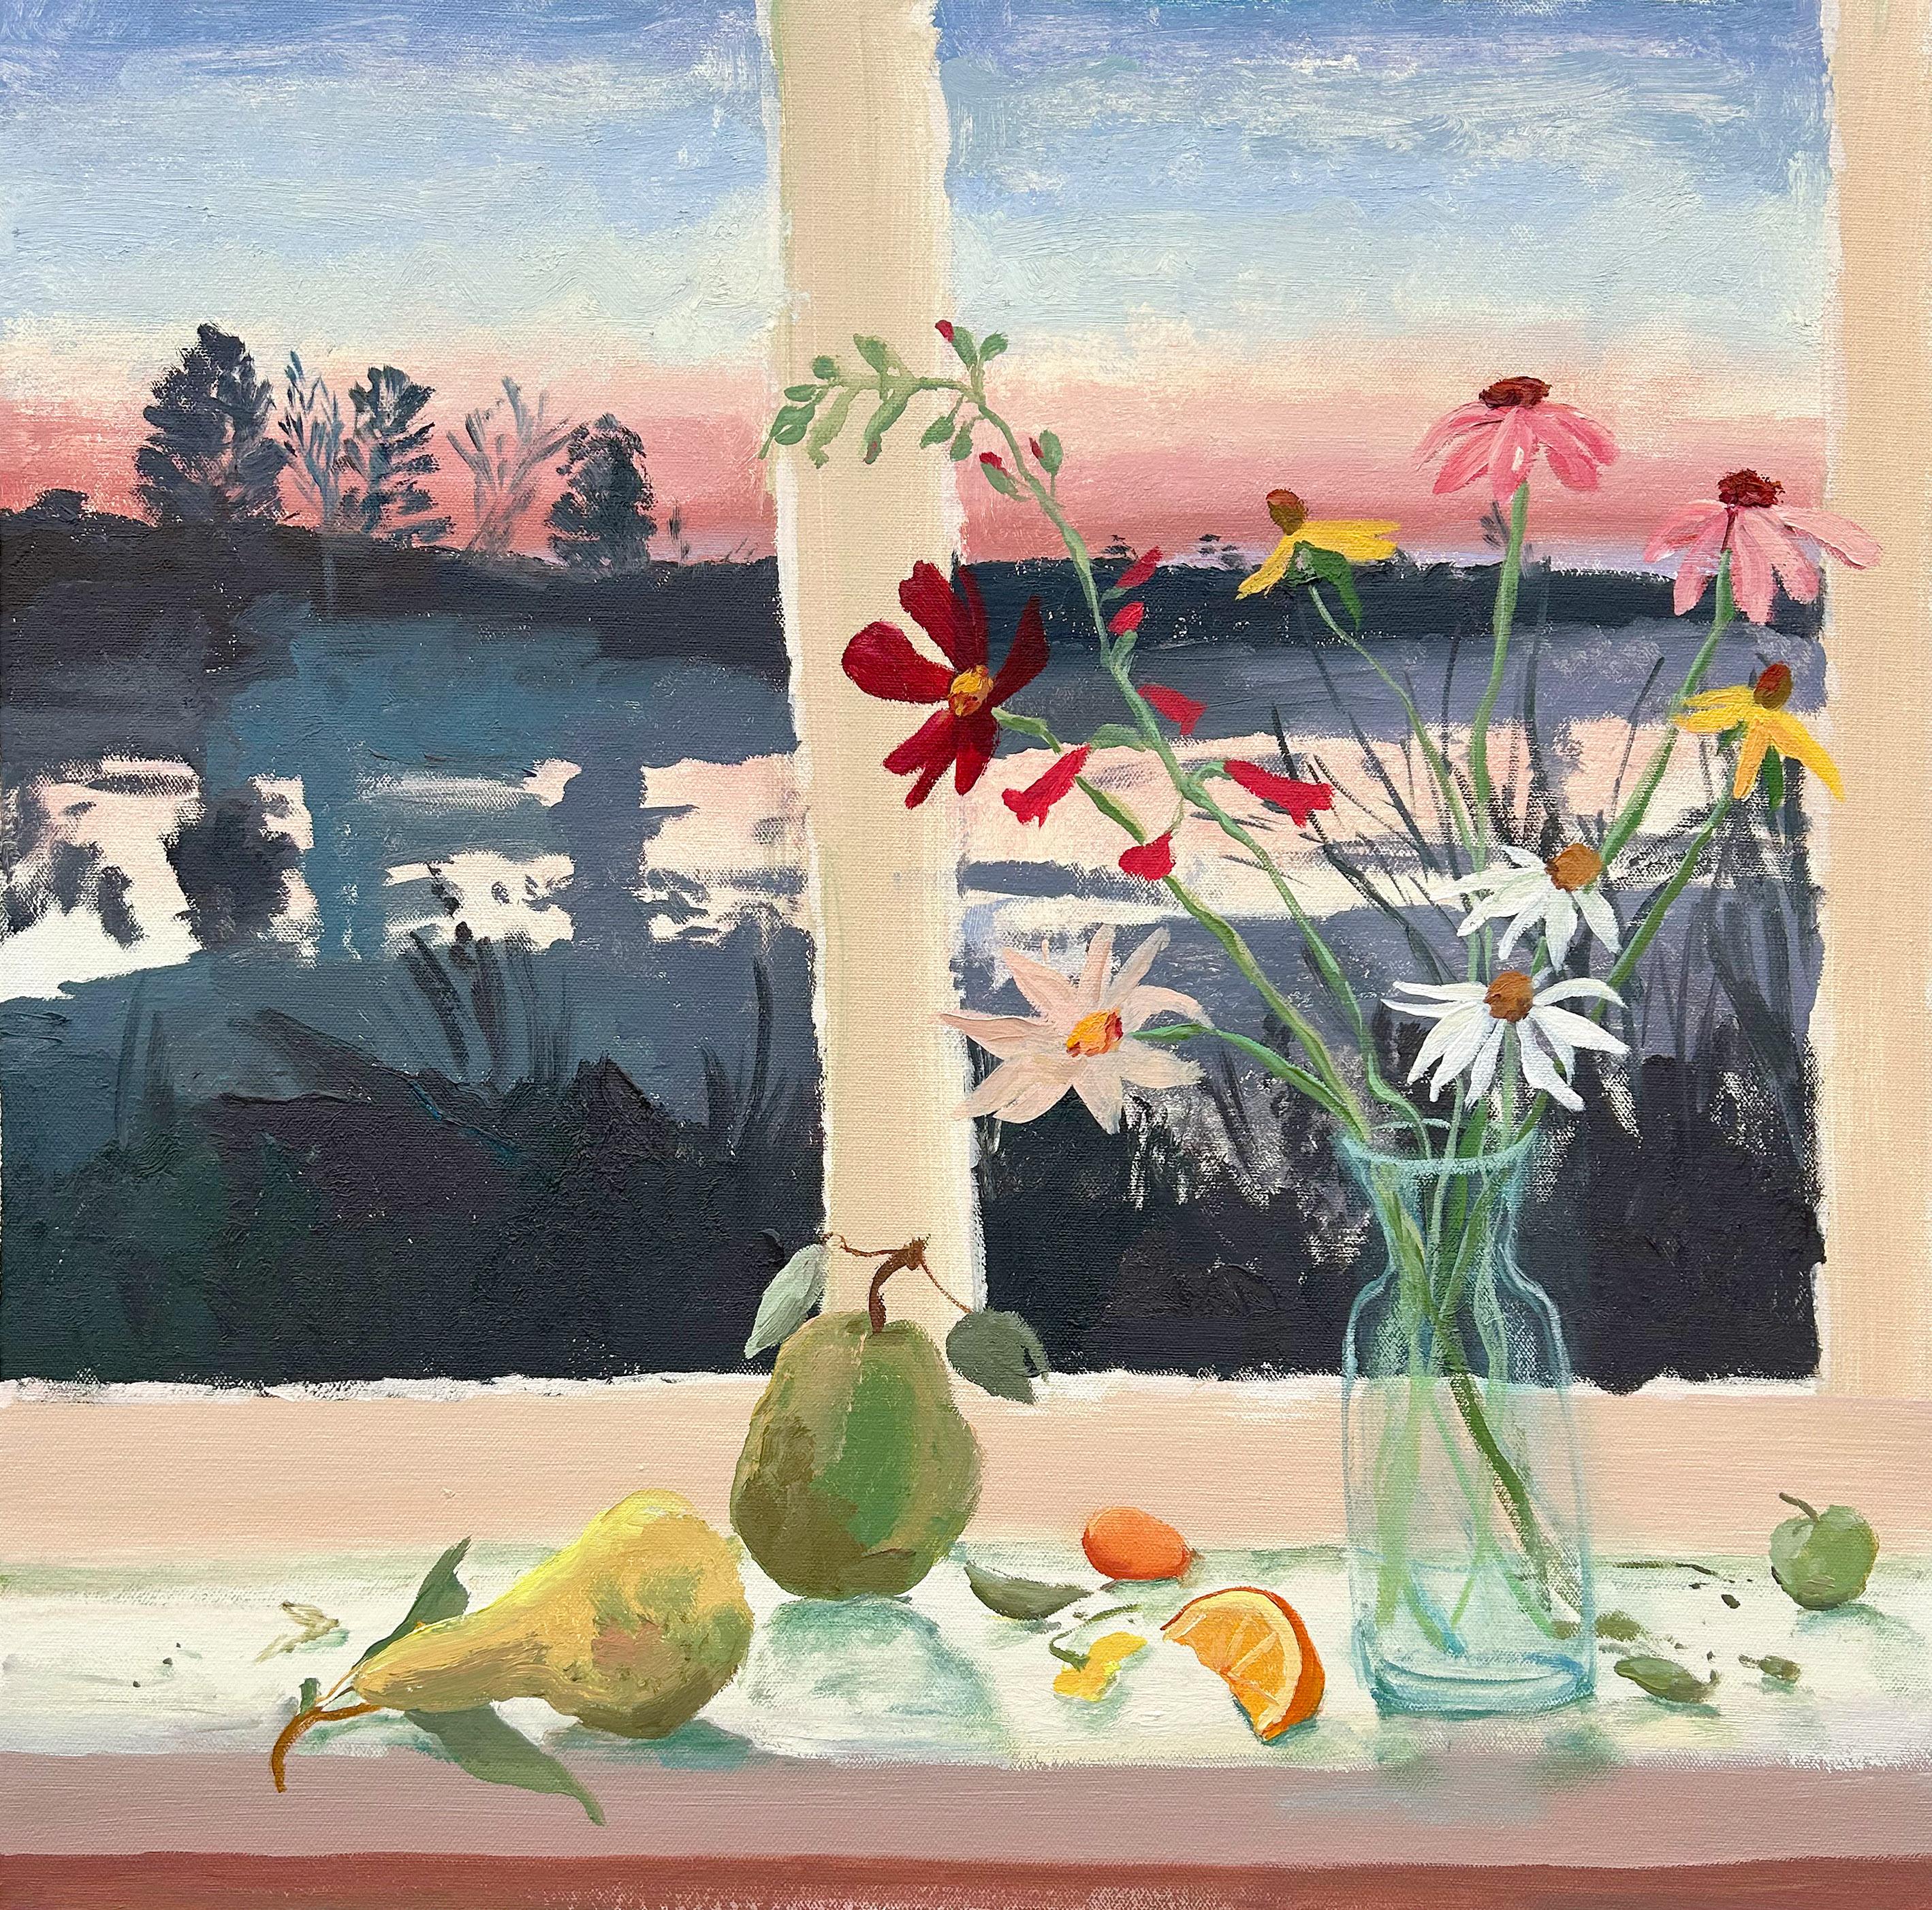 Interior Painting Melanie Parke - The Daisies of the Moon, Yellow, White Flowers, Peach Pink Lake Sunset, Green Pears